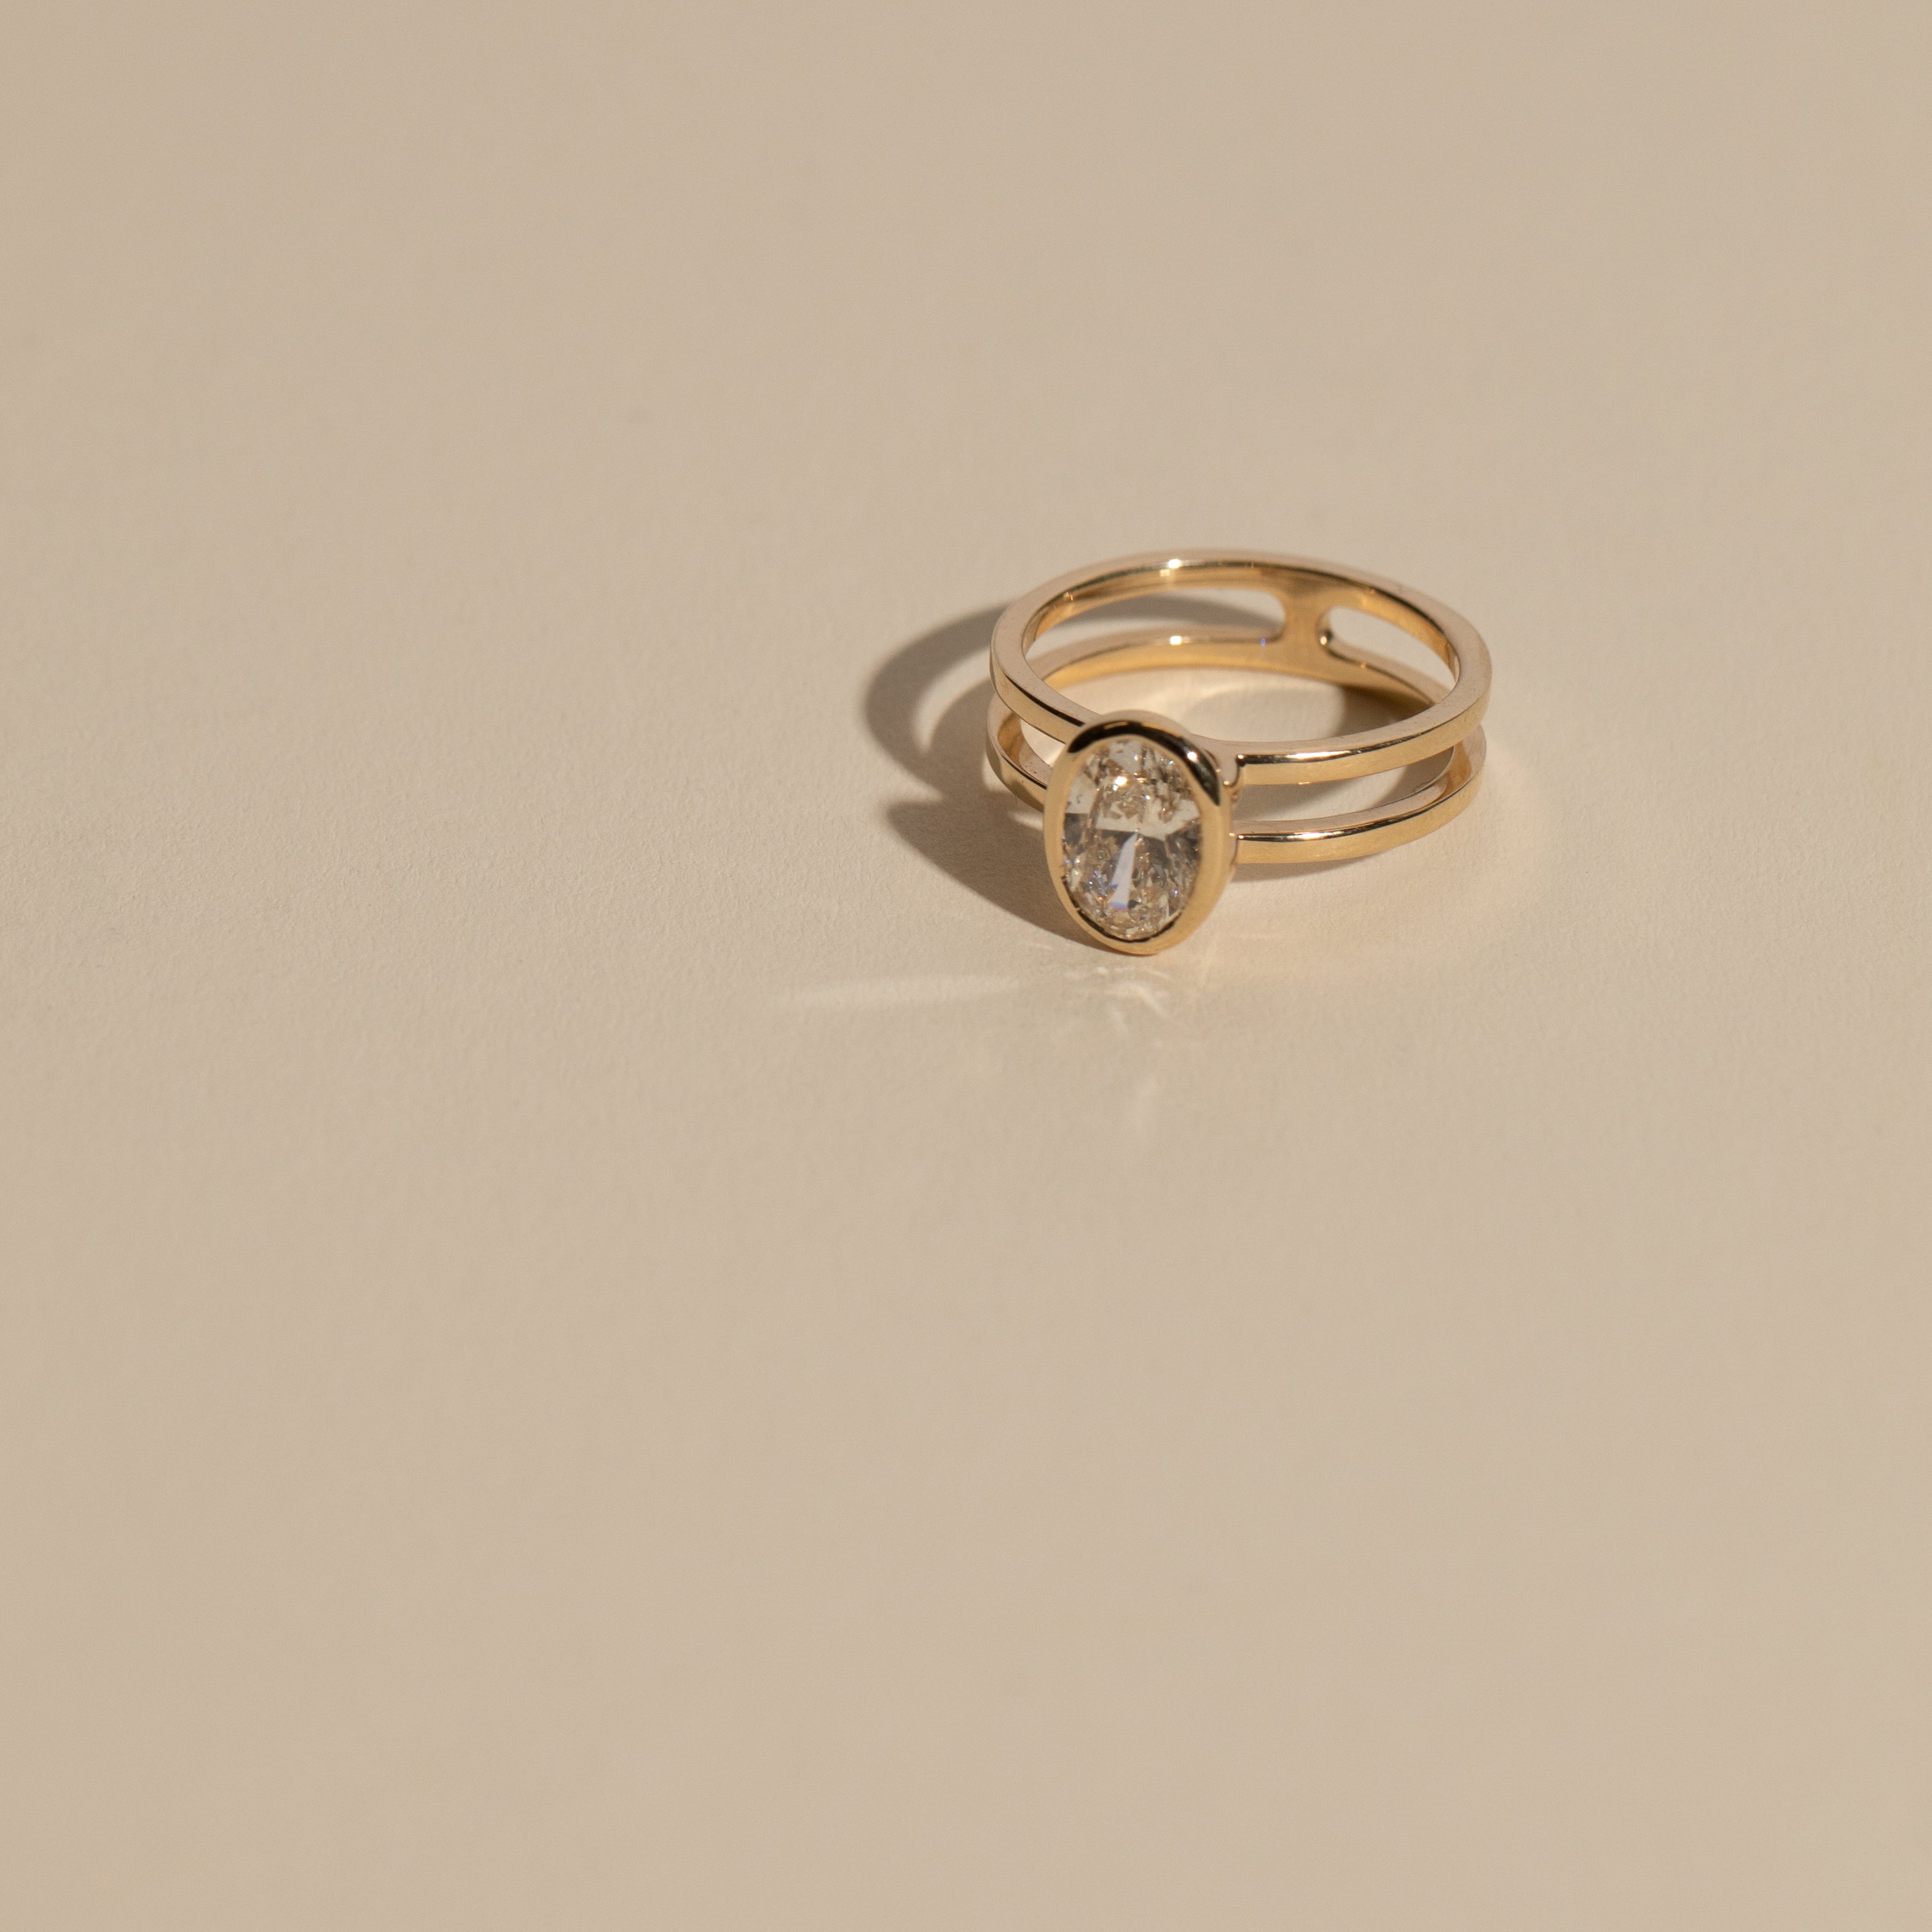 Cool Benu Ring in 14k recycled gold set with a G VS1 1.17ct lab-created diamond made in NYC by SHW fine Jewelry